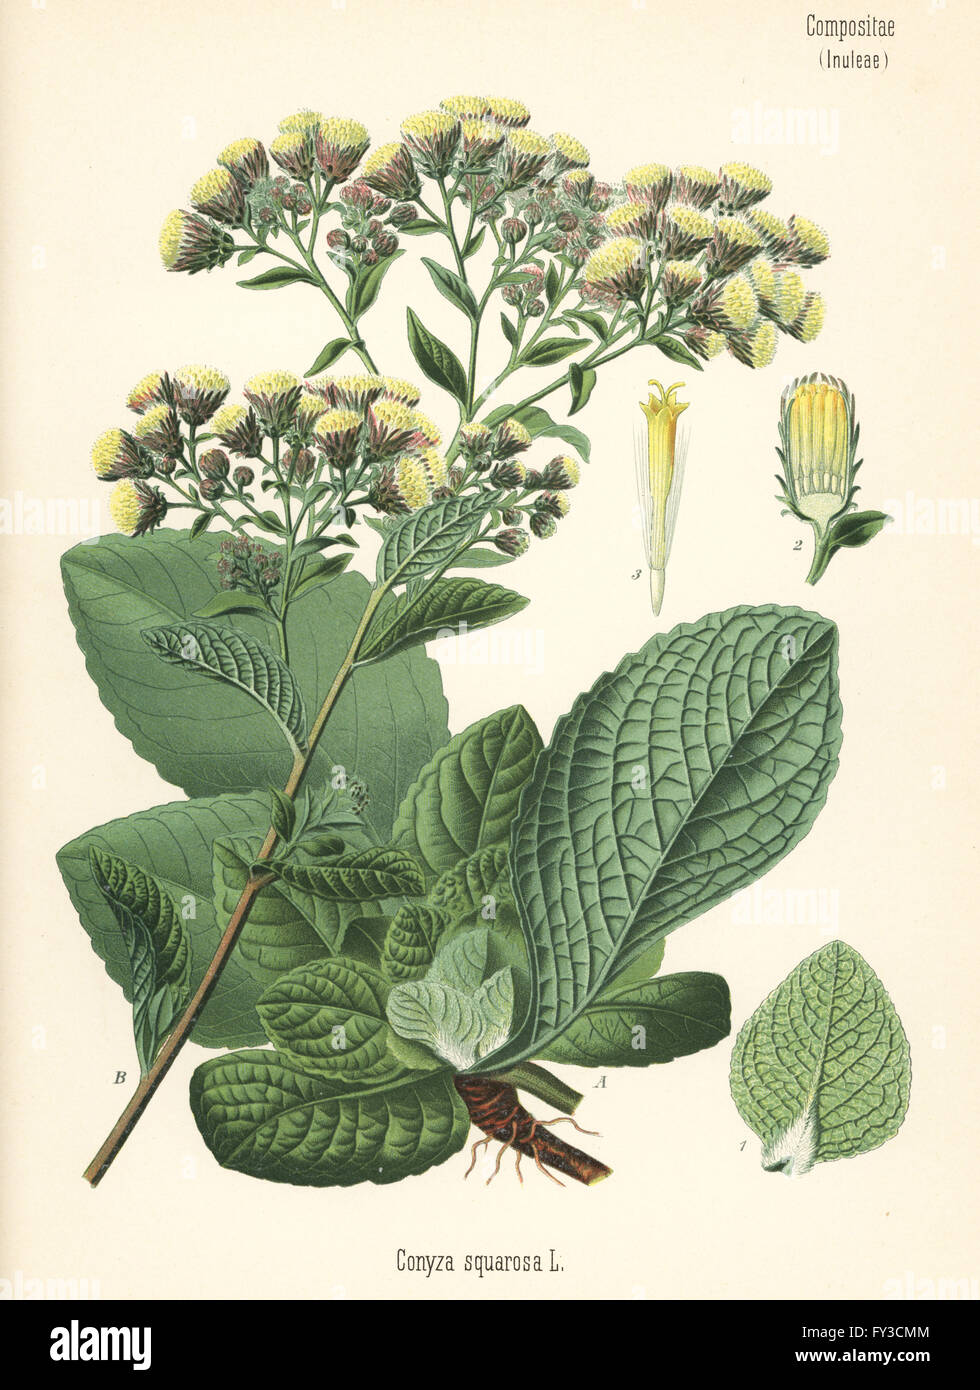 Ploughman's spikenard, Inula conyza (Conyza squarrosa). Chromolithograph after a botanical illustration from Hermann Adolph Koehler's Medicinal Plants, edited by Gustav Pabst, Koehler, Germany, 1887. Stock Photo